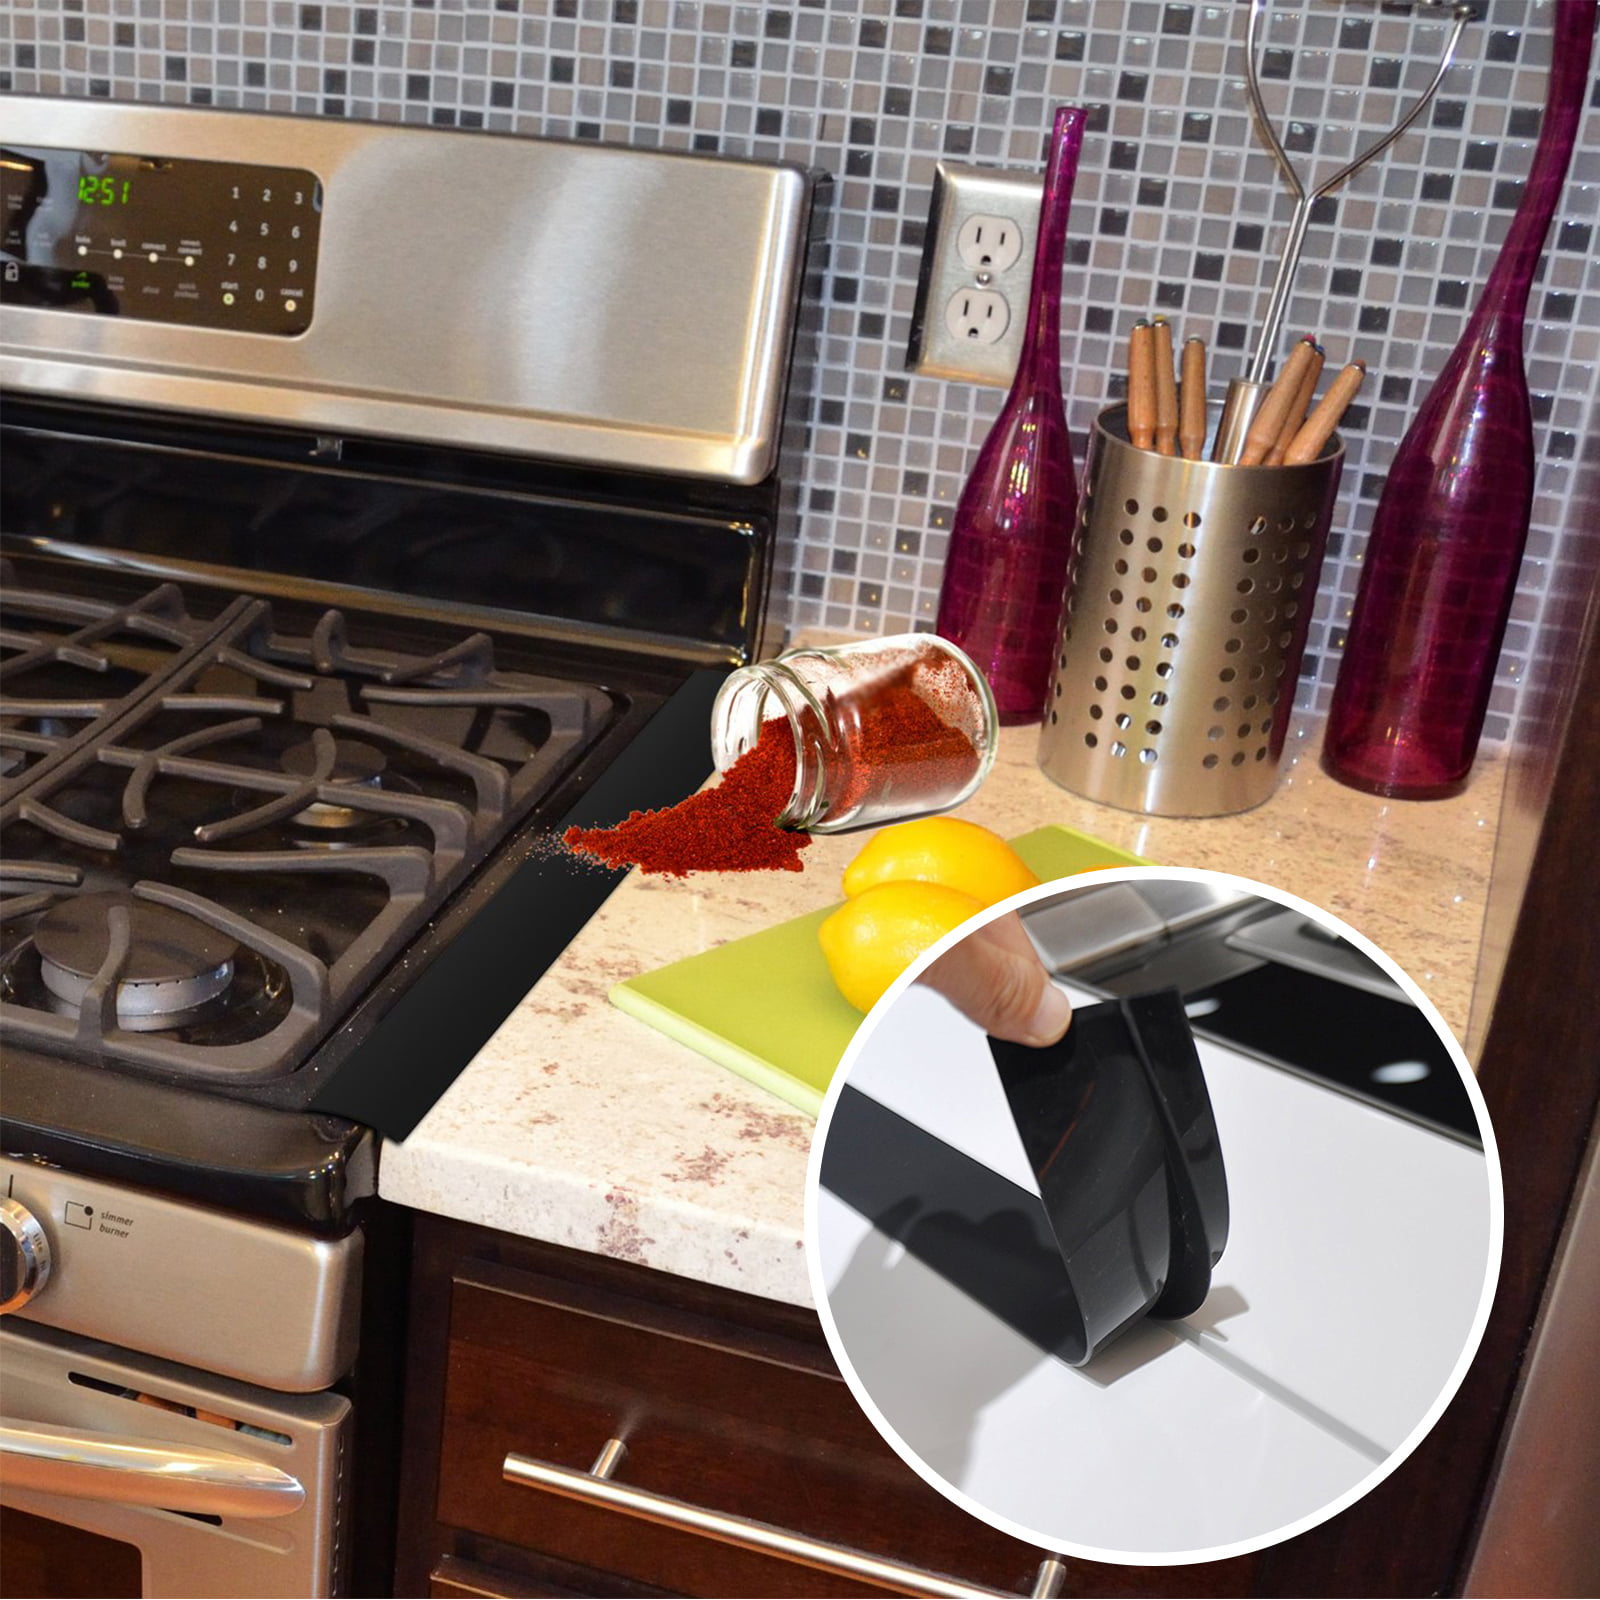 Silicone Stove Counter Gap Cover Spill Guard Seals filler for Cooker Worktop Kit 